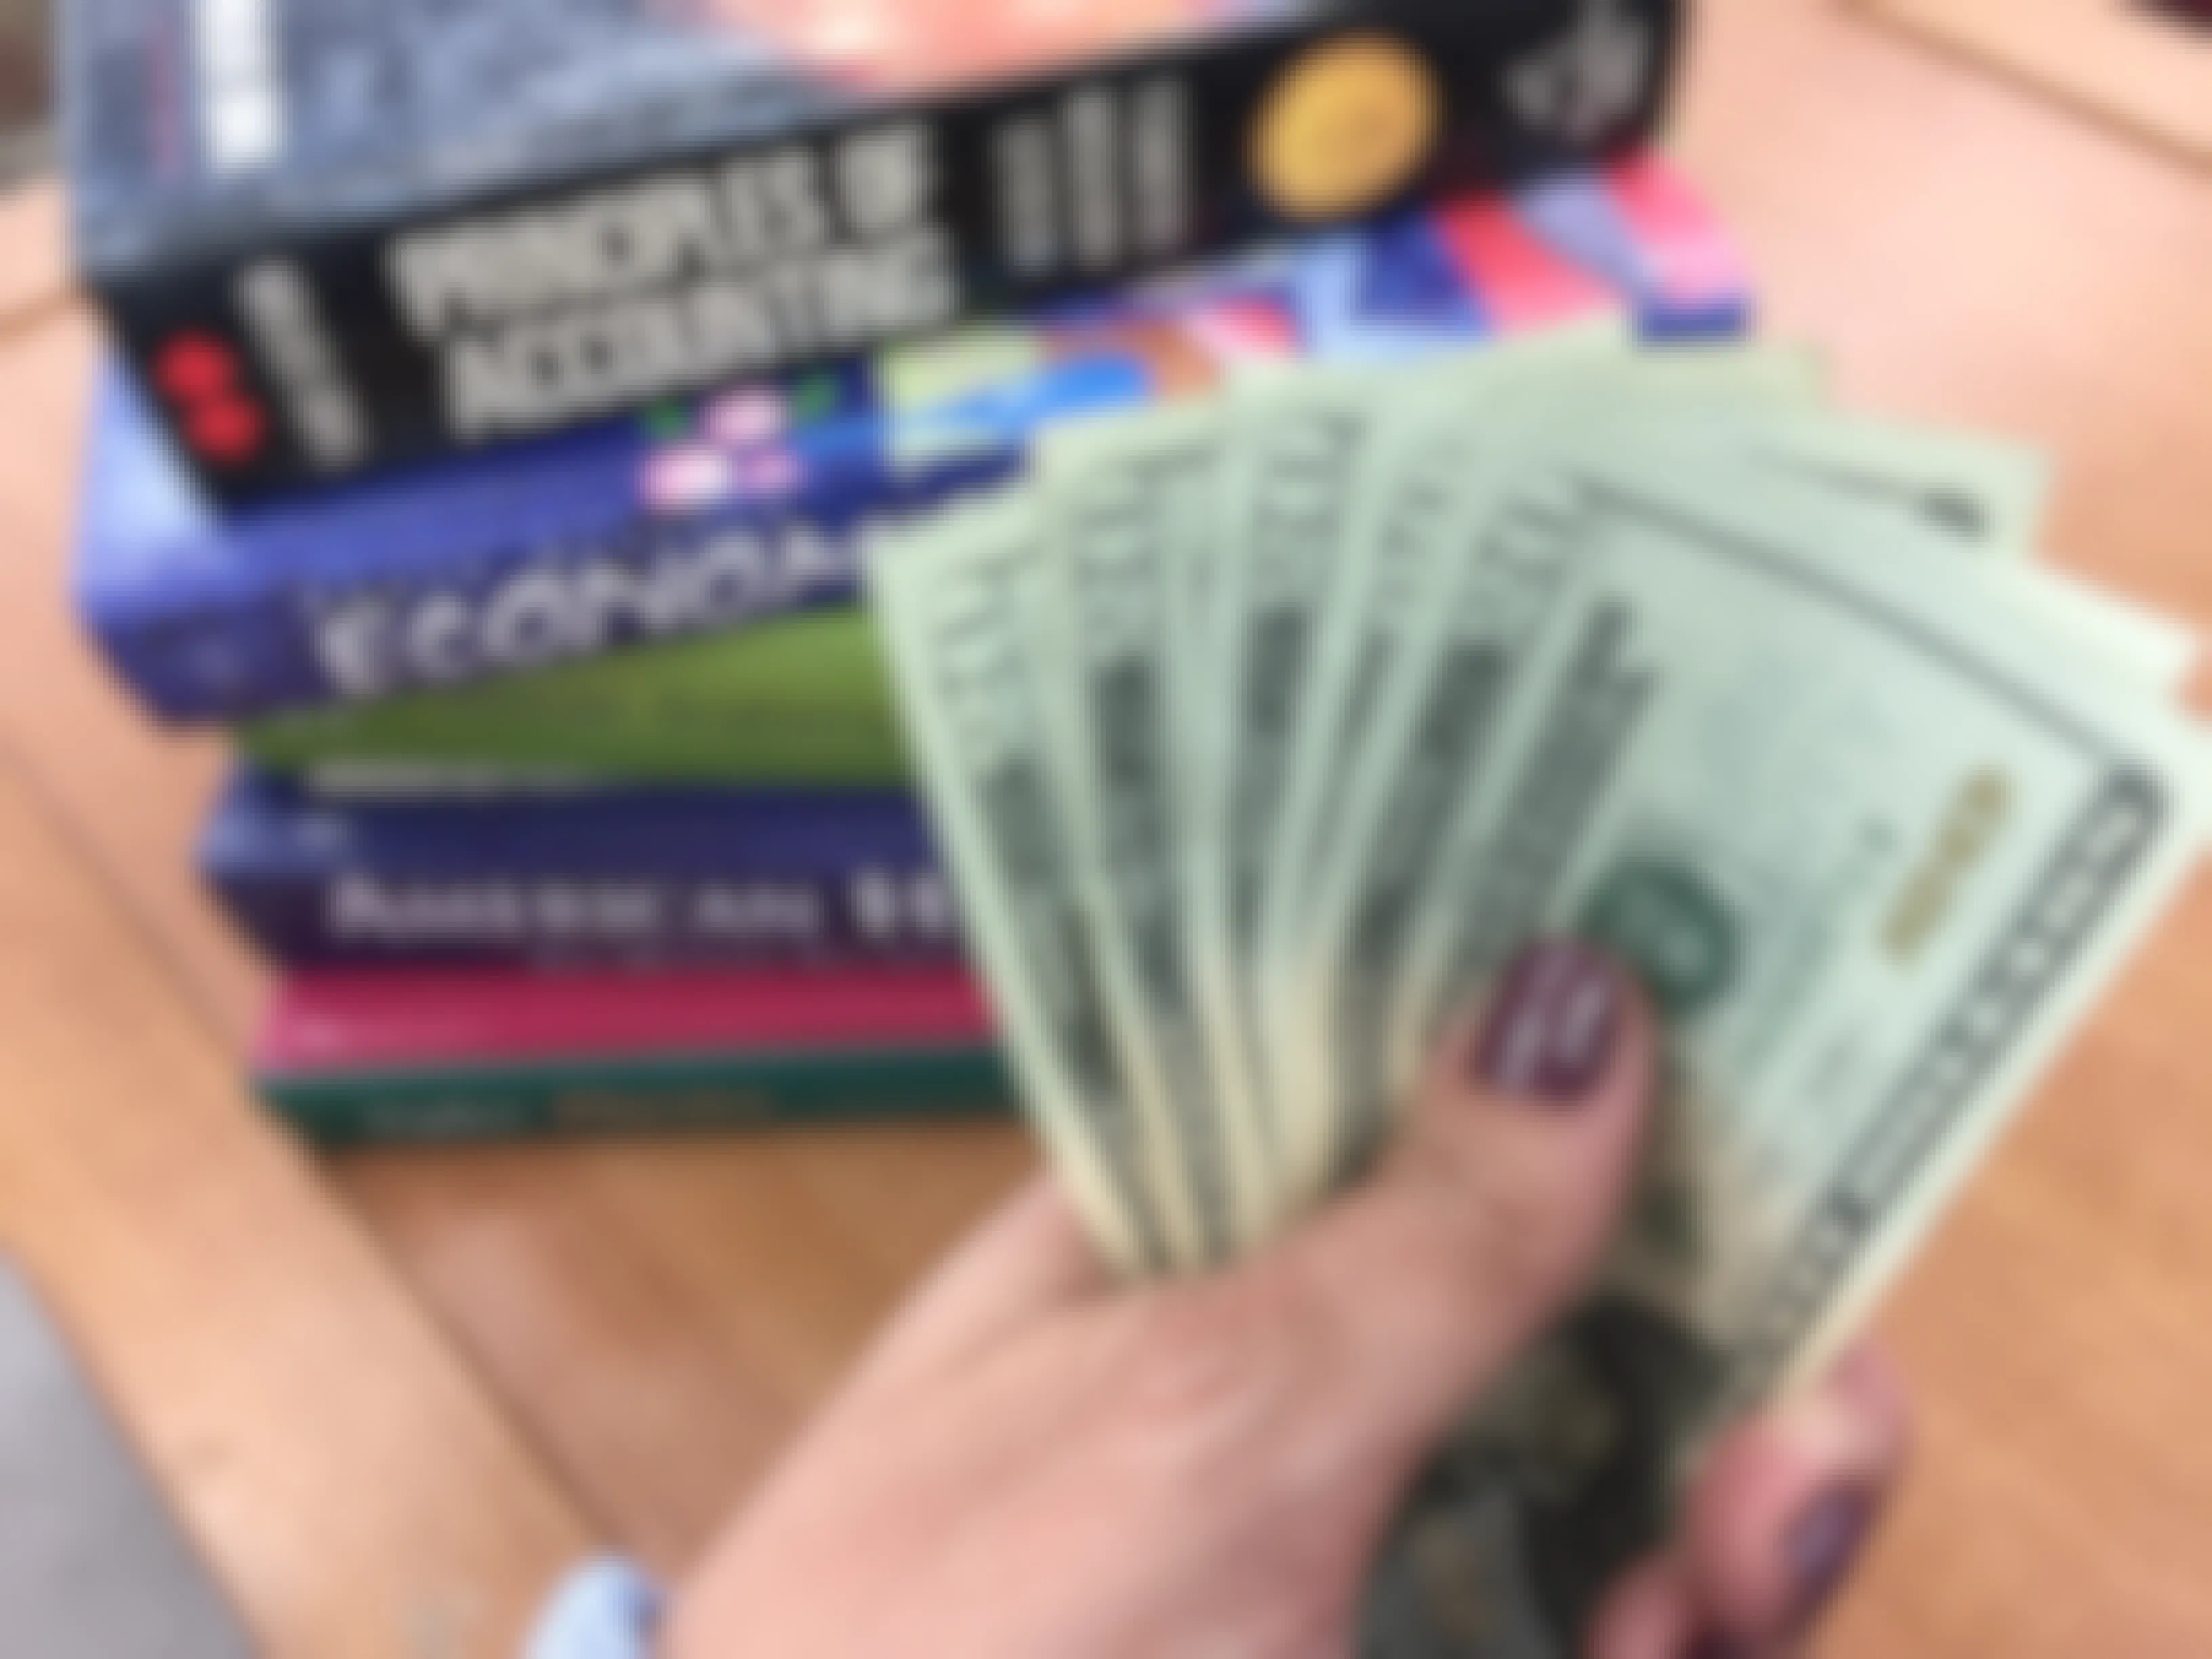 How to Set Aside Almost $13,000 in One Year While Living Paycheck to Paycheck